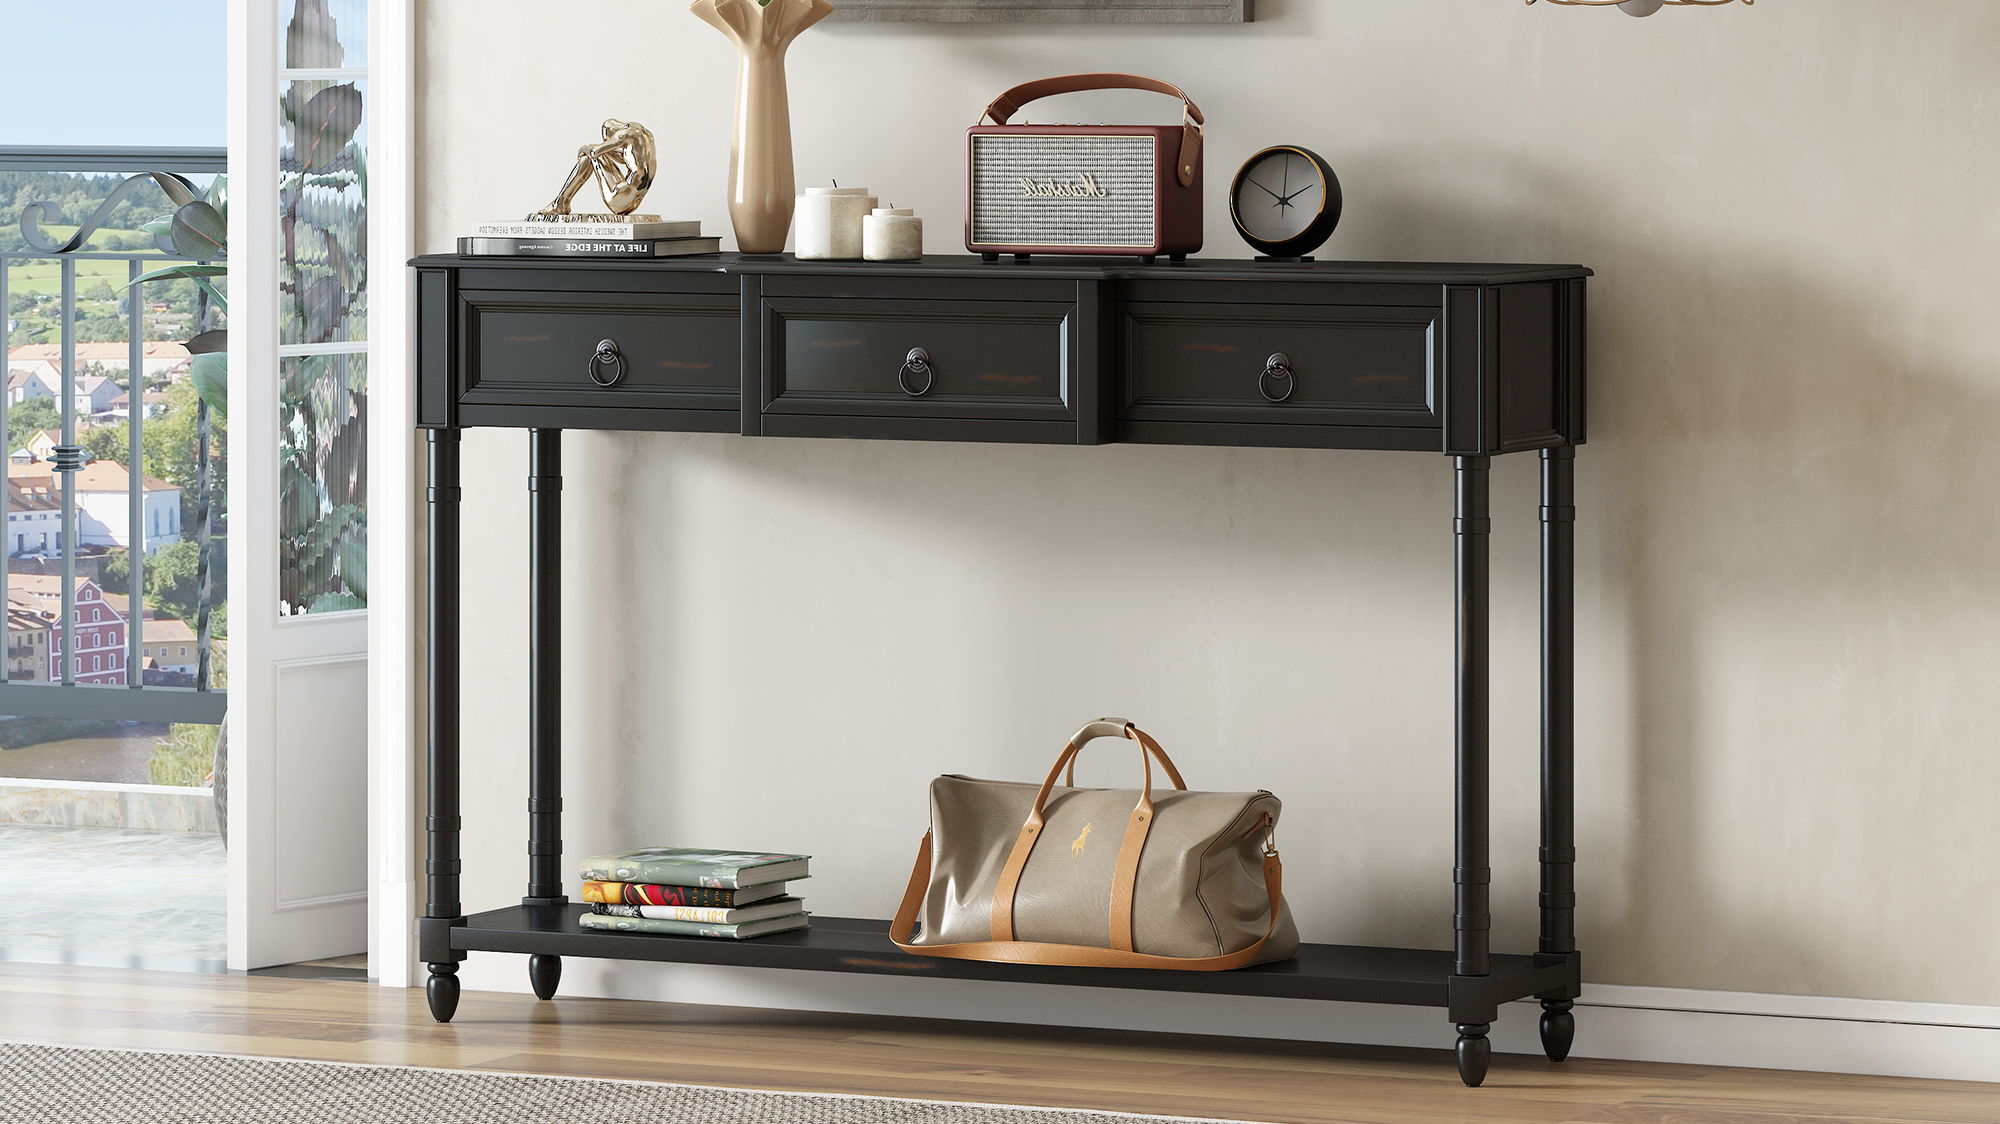 Trexm Console Table Sofa Table With Drawers, For Entryway With Projecting Drawers And Long Shelf - Espresso